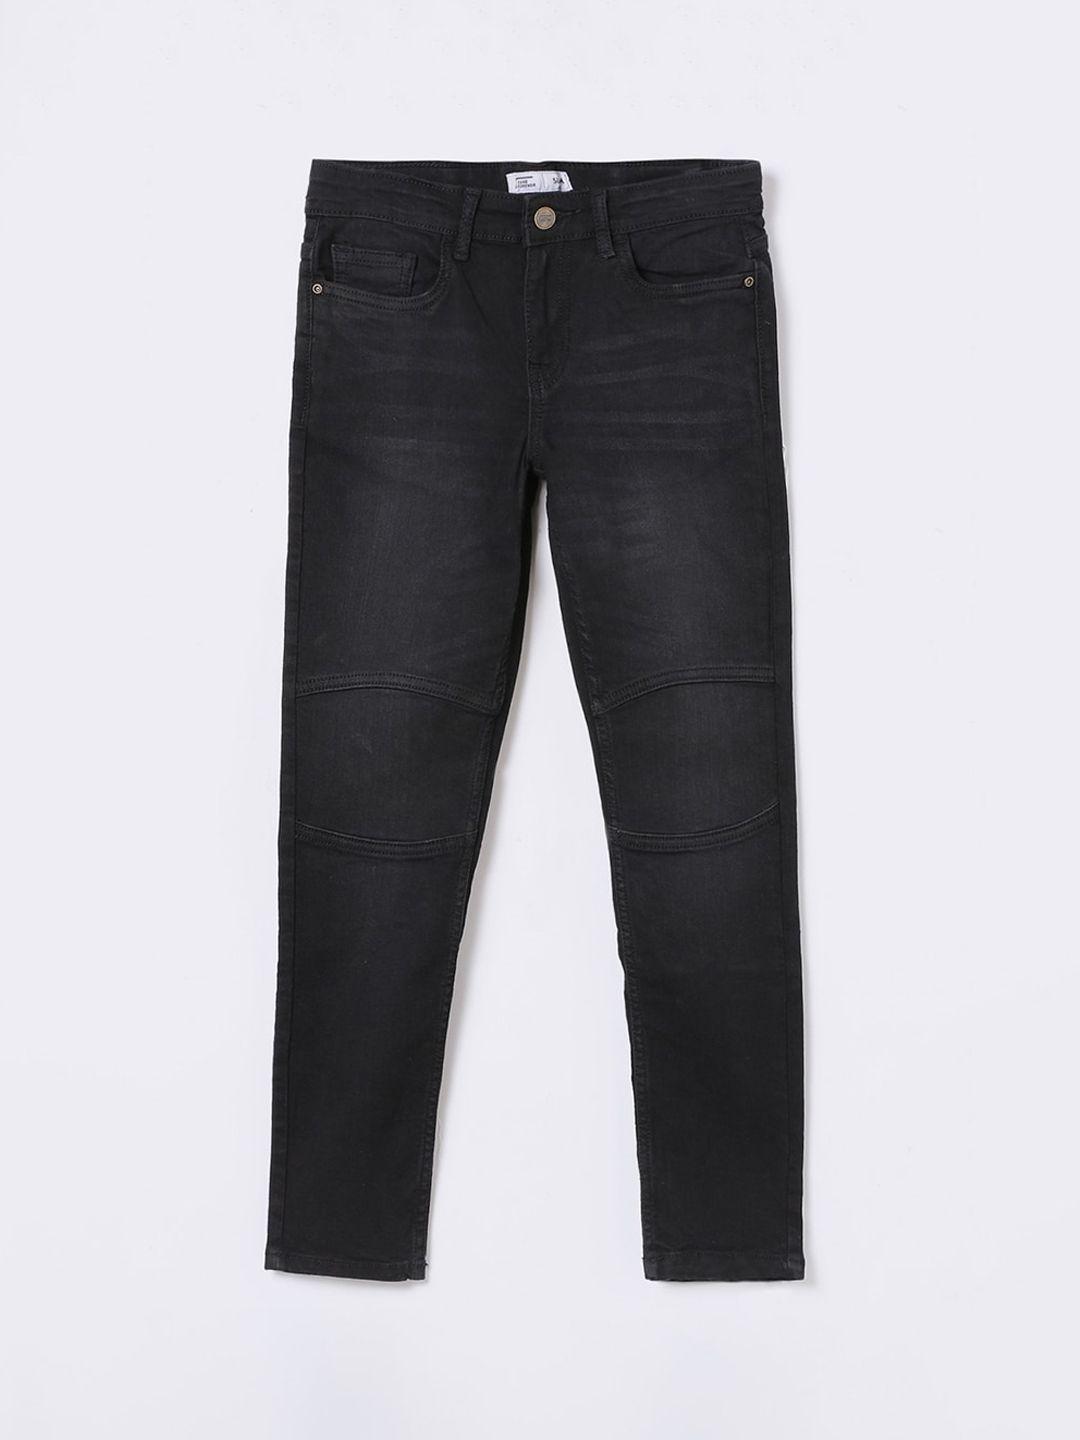 fame-forever-by-lifestyle-boys-light-fade-stretchable-cotton-jeans